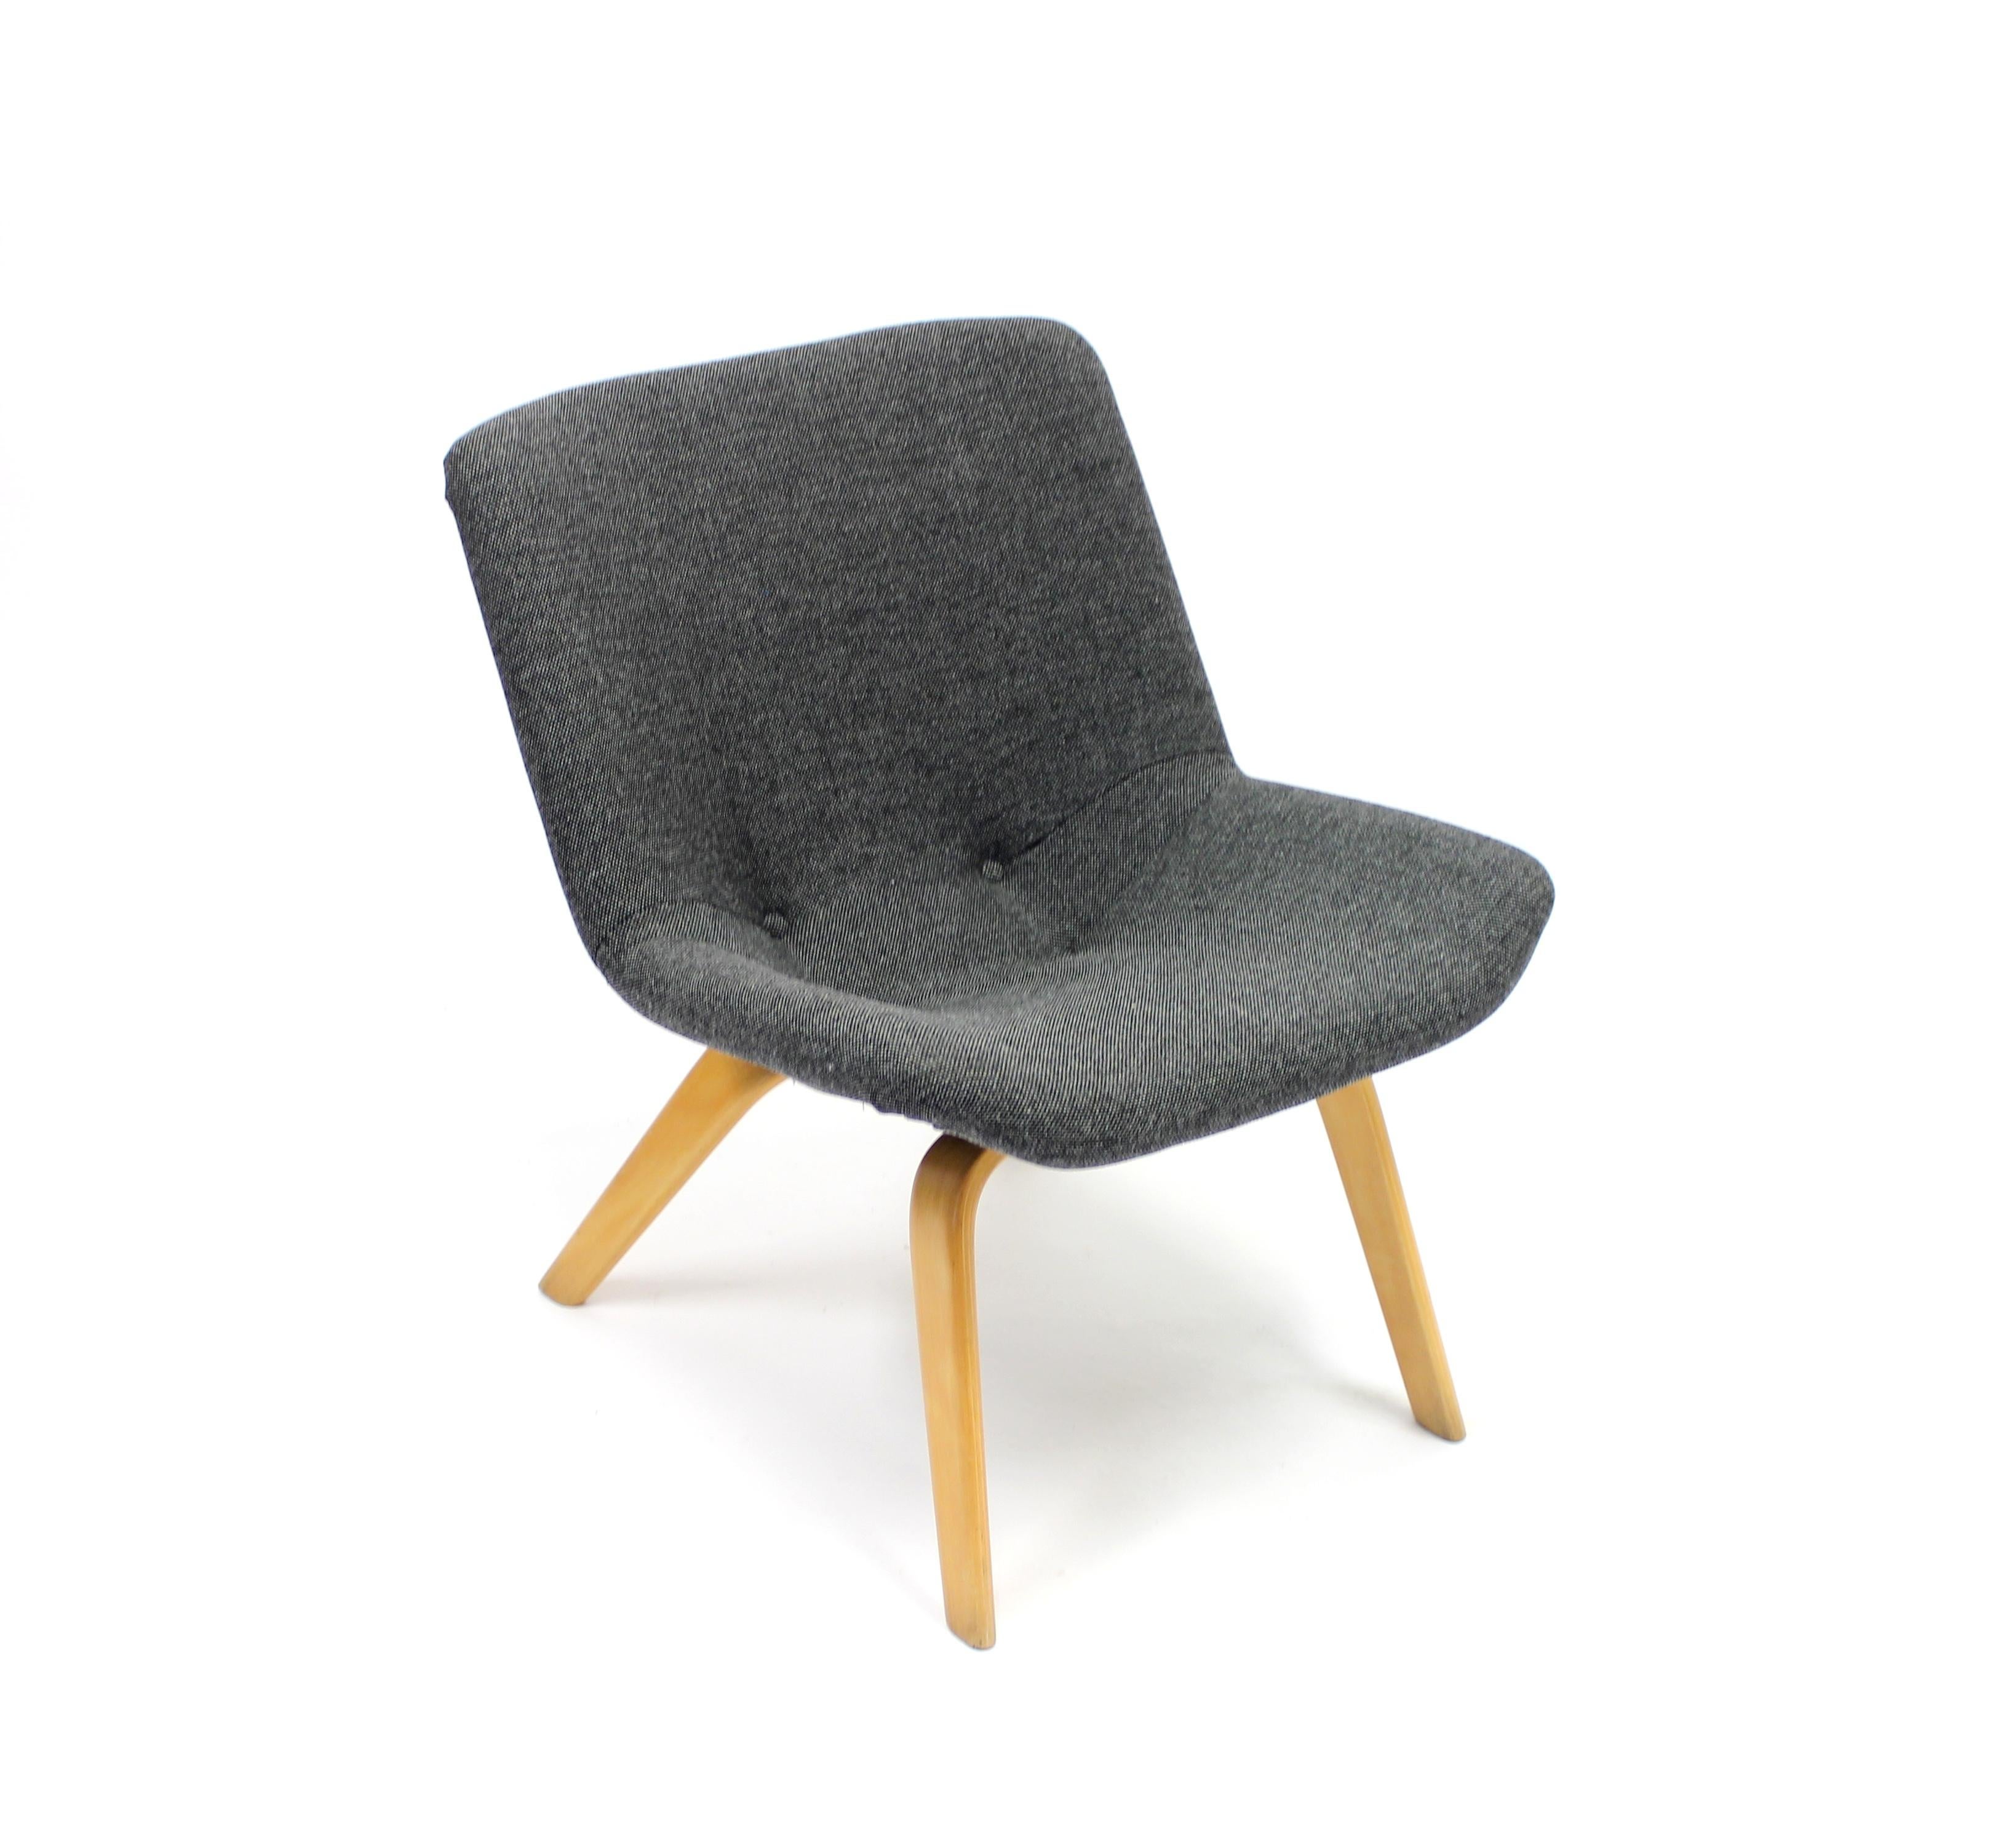 Easy chair made by Finnish designer Carl Gustaf Hiort af Ornäs for Swedish manufacturer and furniture store Gösta Westerberg in the 1950s. Neat and low model. Reupholstered in a new grey Kvadrat fabric to seat and back. Legs made of birch. Very good